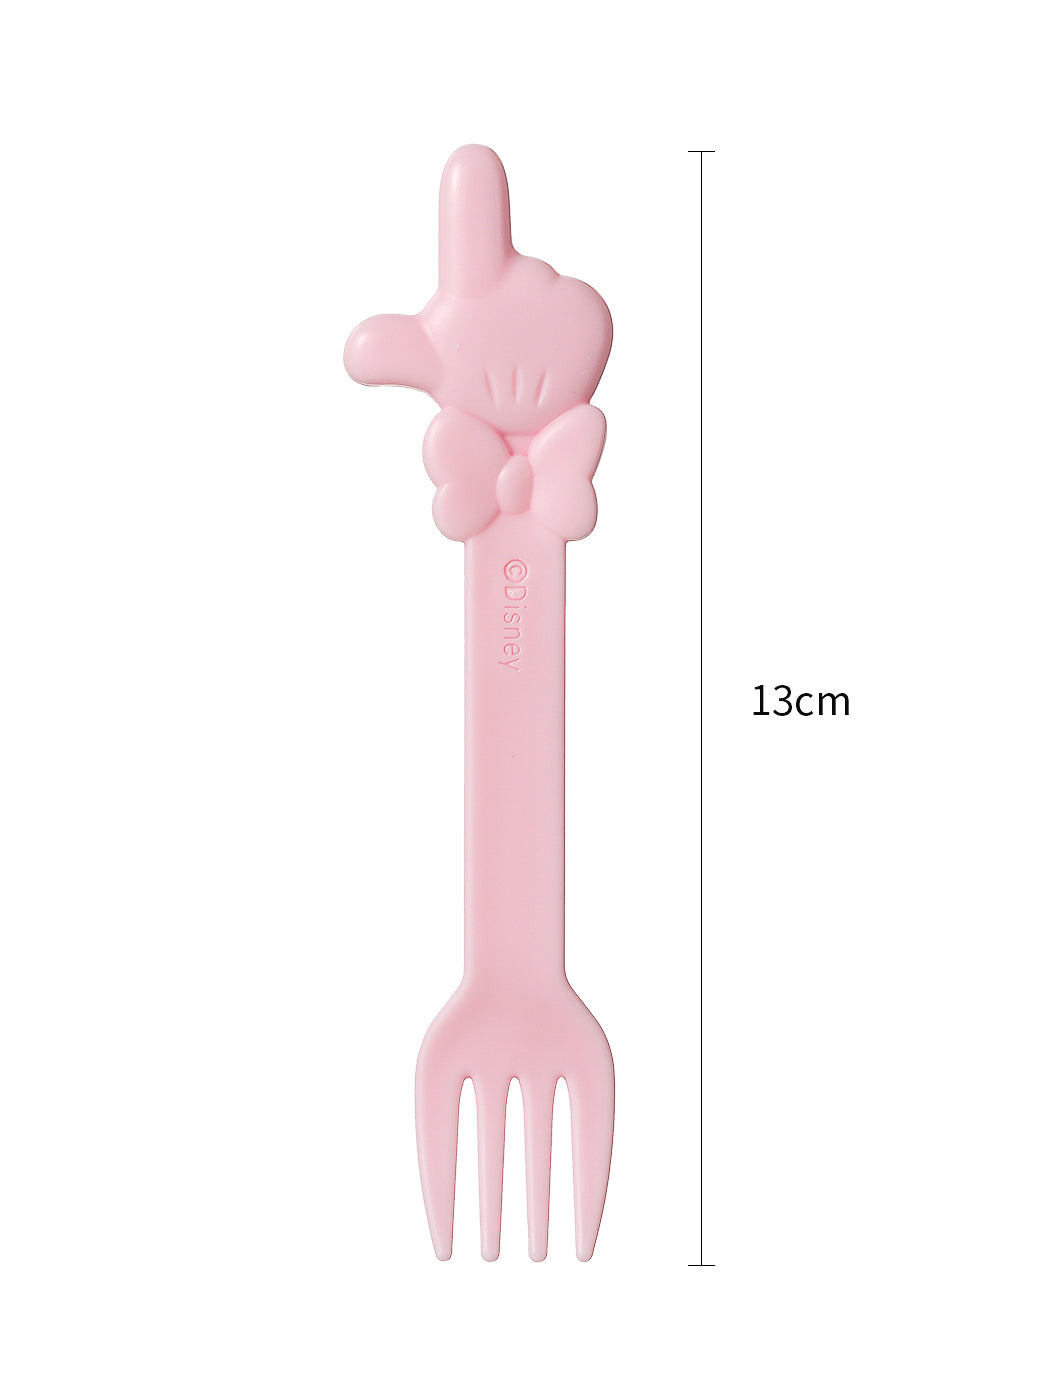 MINISO MICKEY MOUSE COLLECTION 2.0 FORK 8PCS(MINNIE MOUSE) 2010538311101 CUTLERY SET